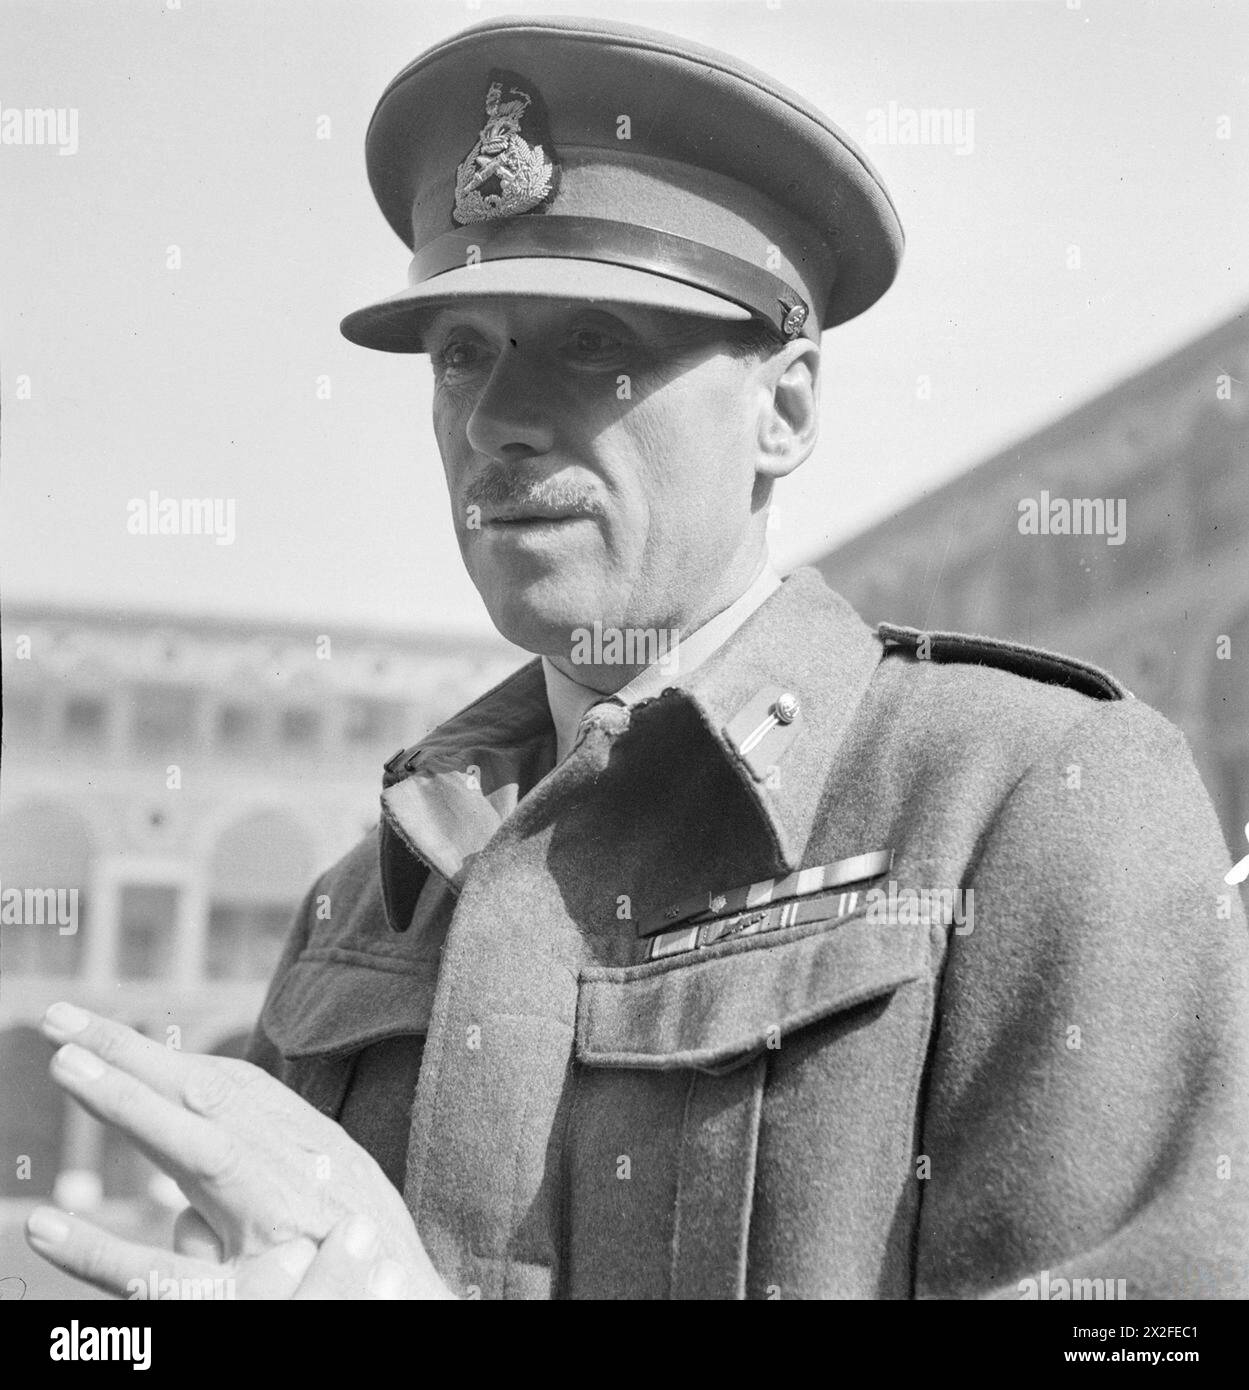 BRITISH GENERALS 1939-1945 - Major General John 'Jock' Campbell VC (1894 - 1942): Campbell at his investiture with the Victoria Cross by the Commander in Chief, General Sir Claude Auchinleck. Campbell was awarded the VC for his action at Sidi Rezergh, 21 - 22 November 1941 Campbell, John Charles 'Jock', Auchinleck, Claude John Eyre Stock Photo